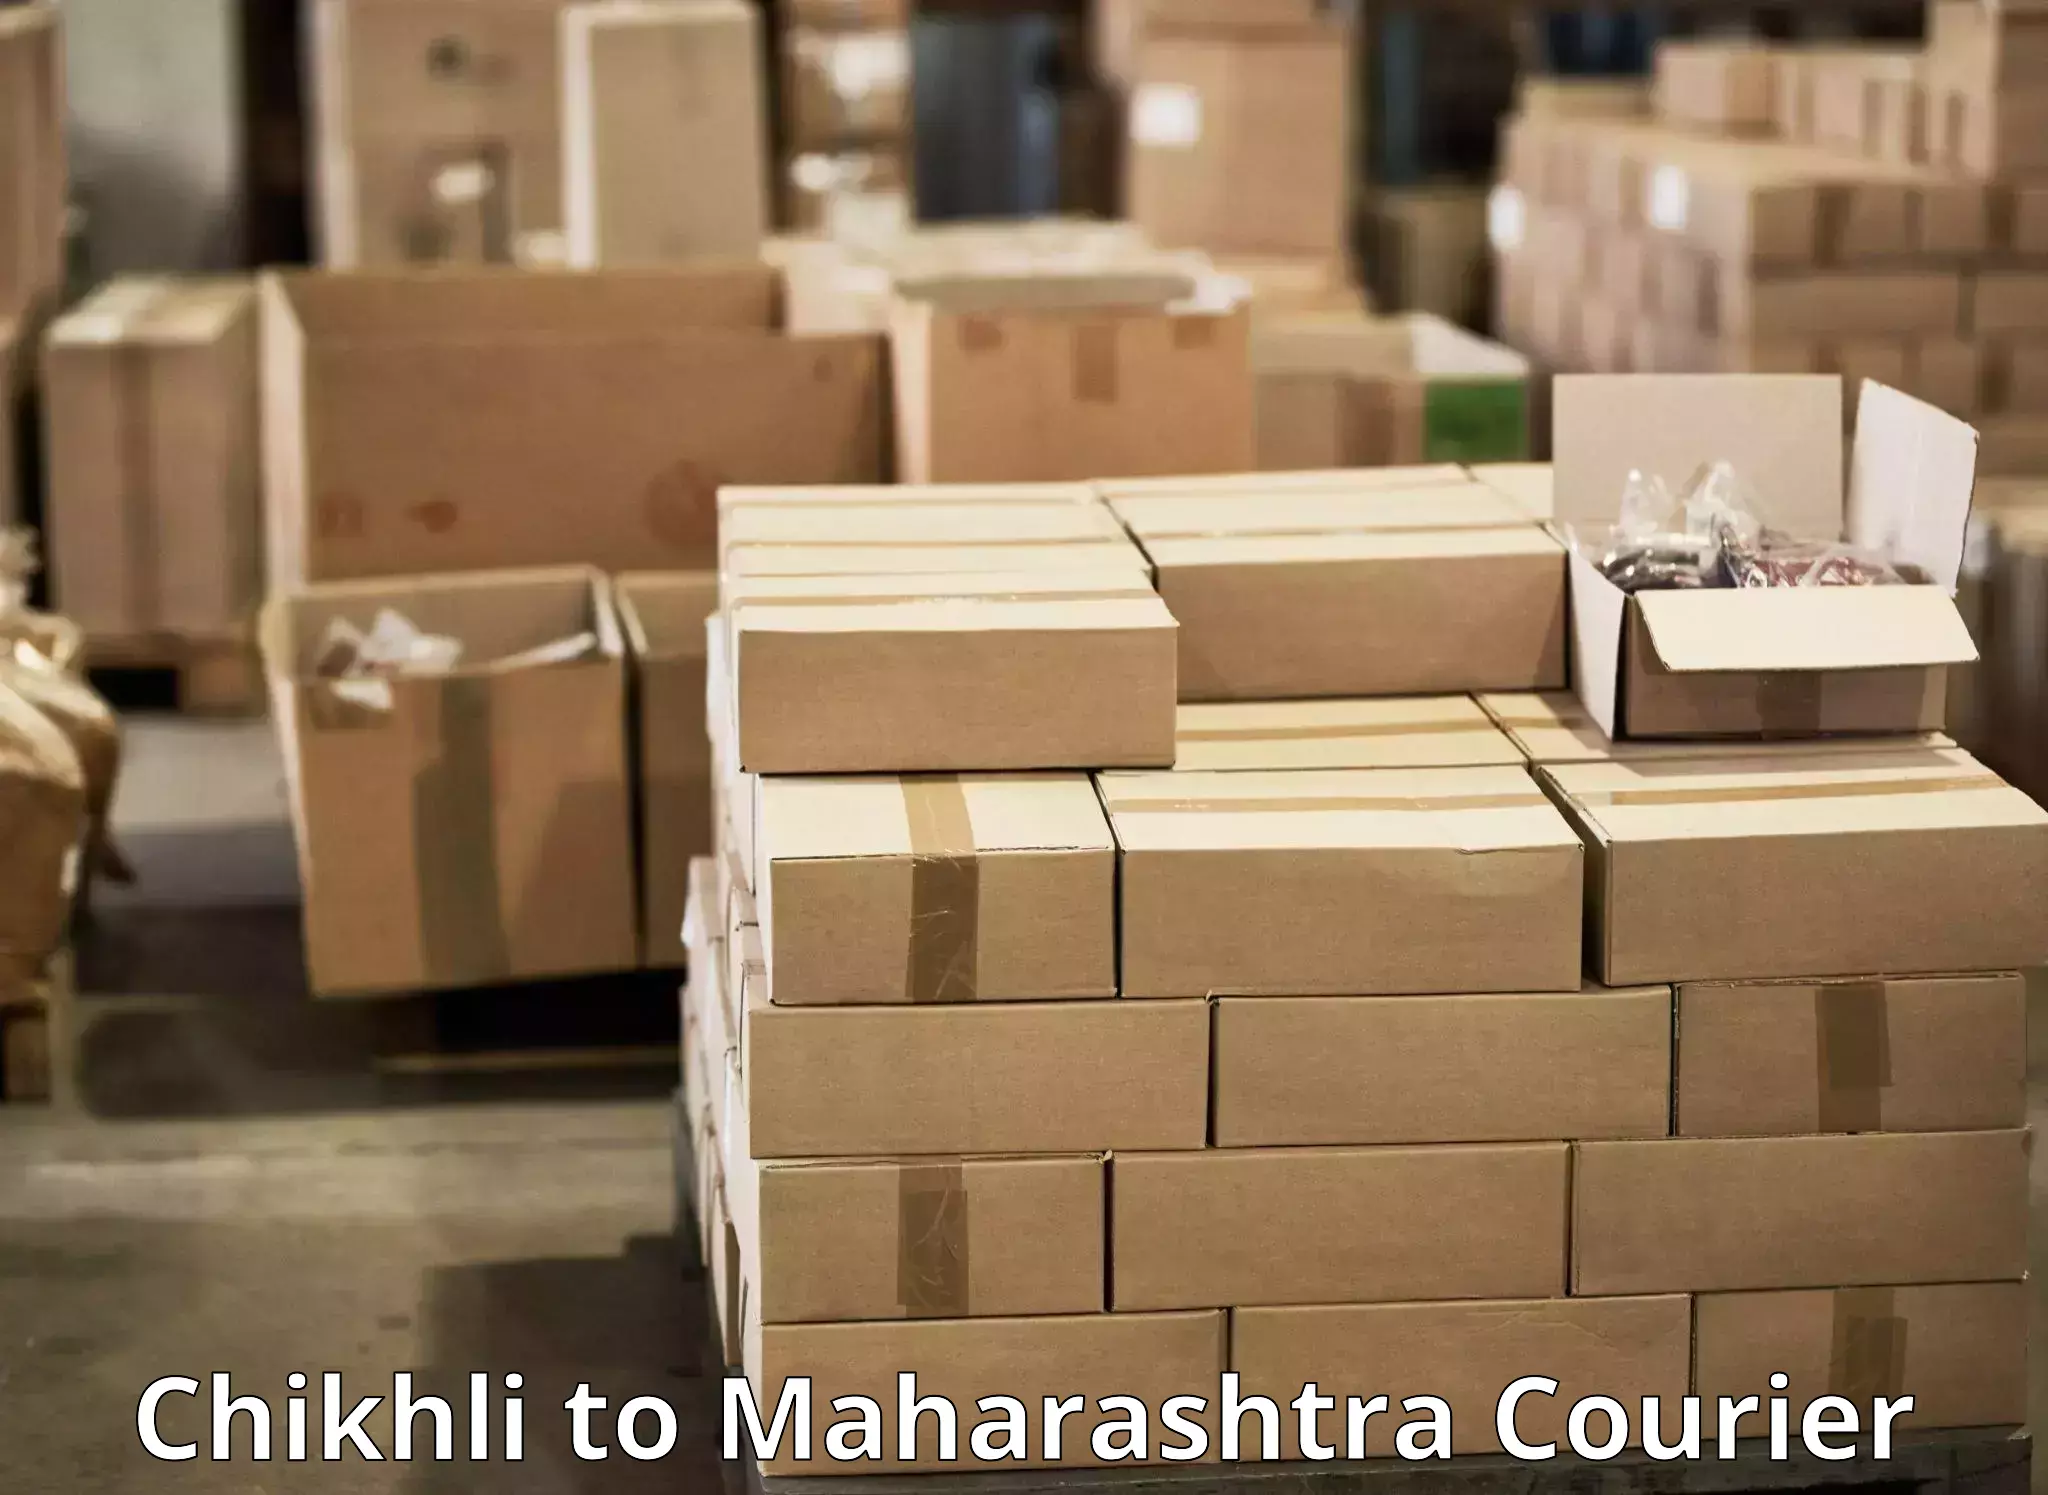 Reliable courier service Chikhli to Kalyan Dombivli